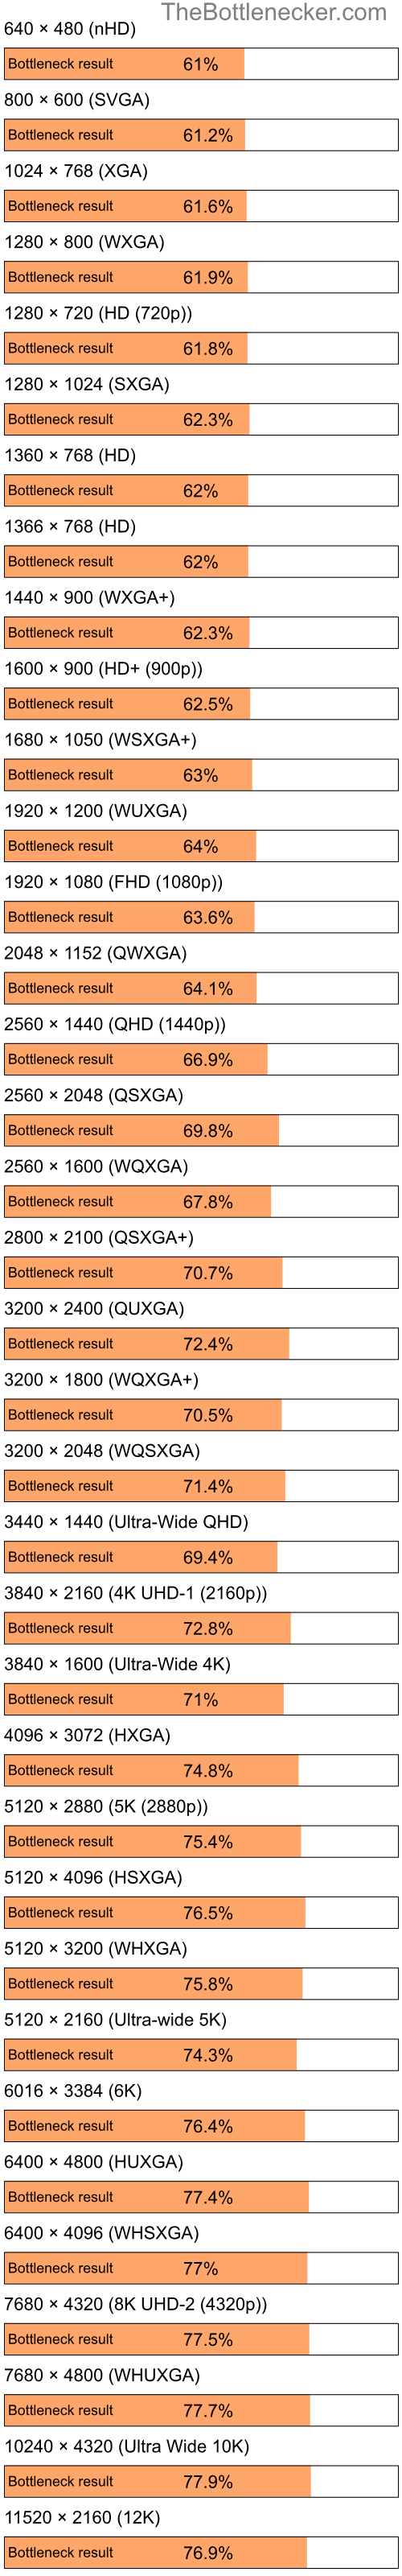 Bottleneck results by resolution for Intel Celeron M 410 and NVIDIA Quadro FX 550 in Processor Intense Tasks